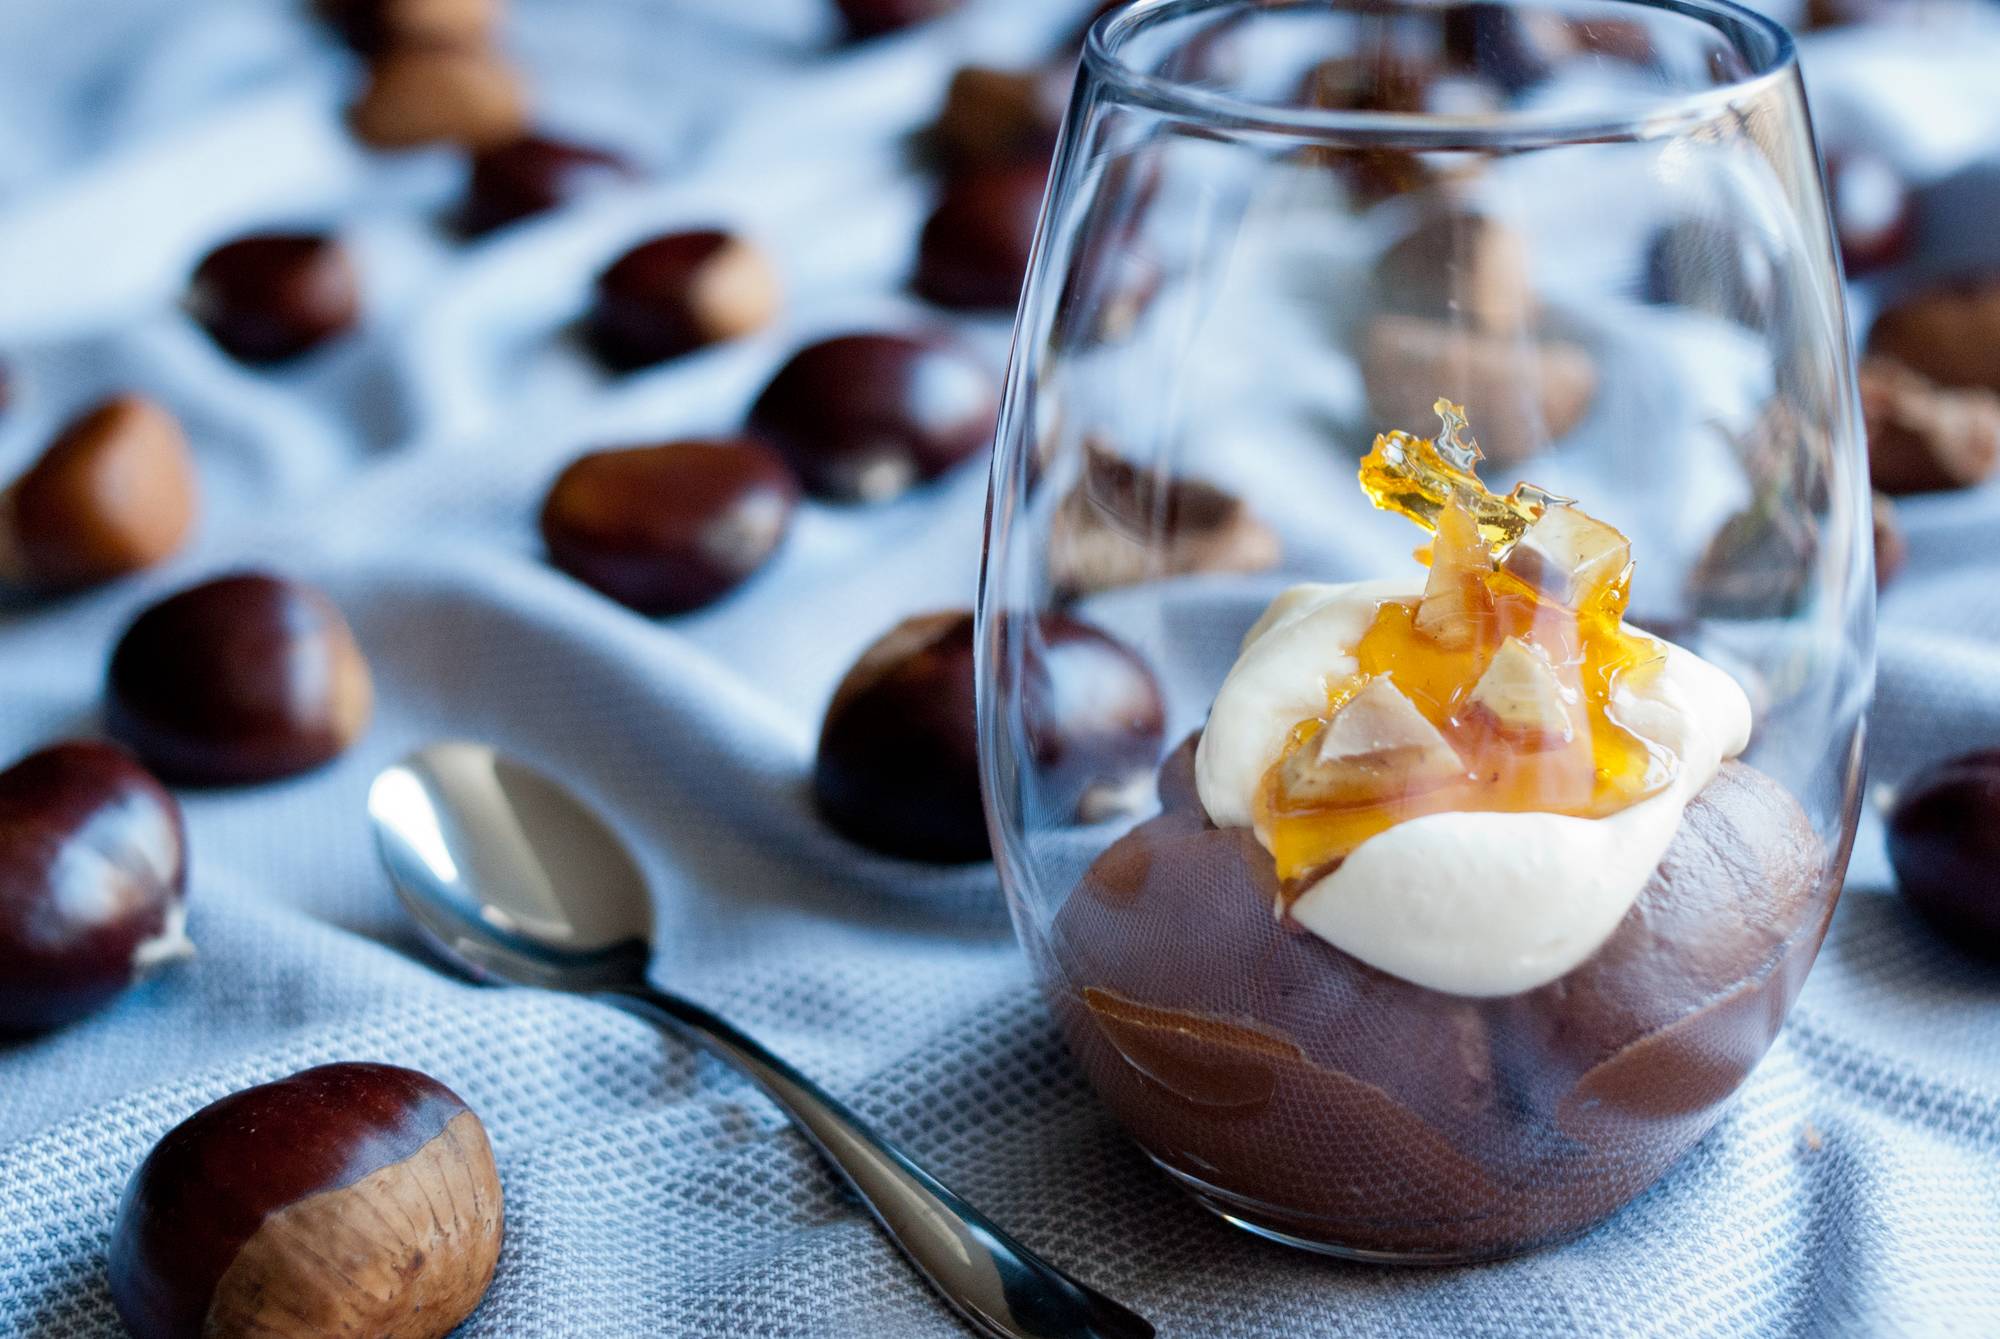 Chestnut and Chocolate Mousse with Chestnut Toffee Shards